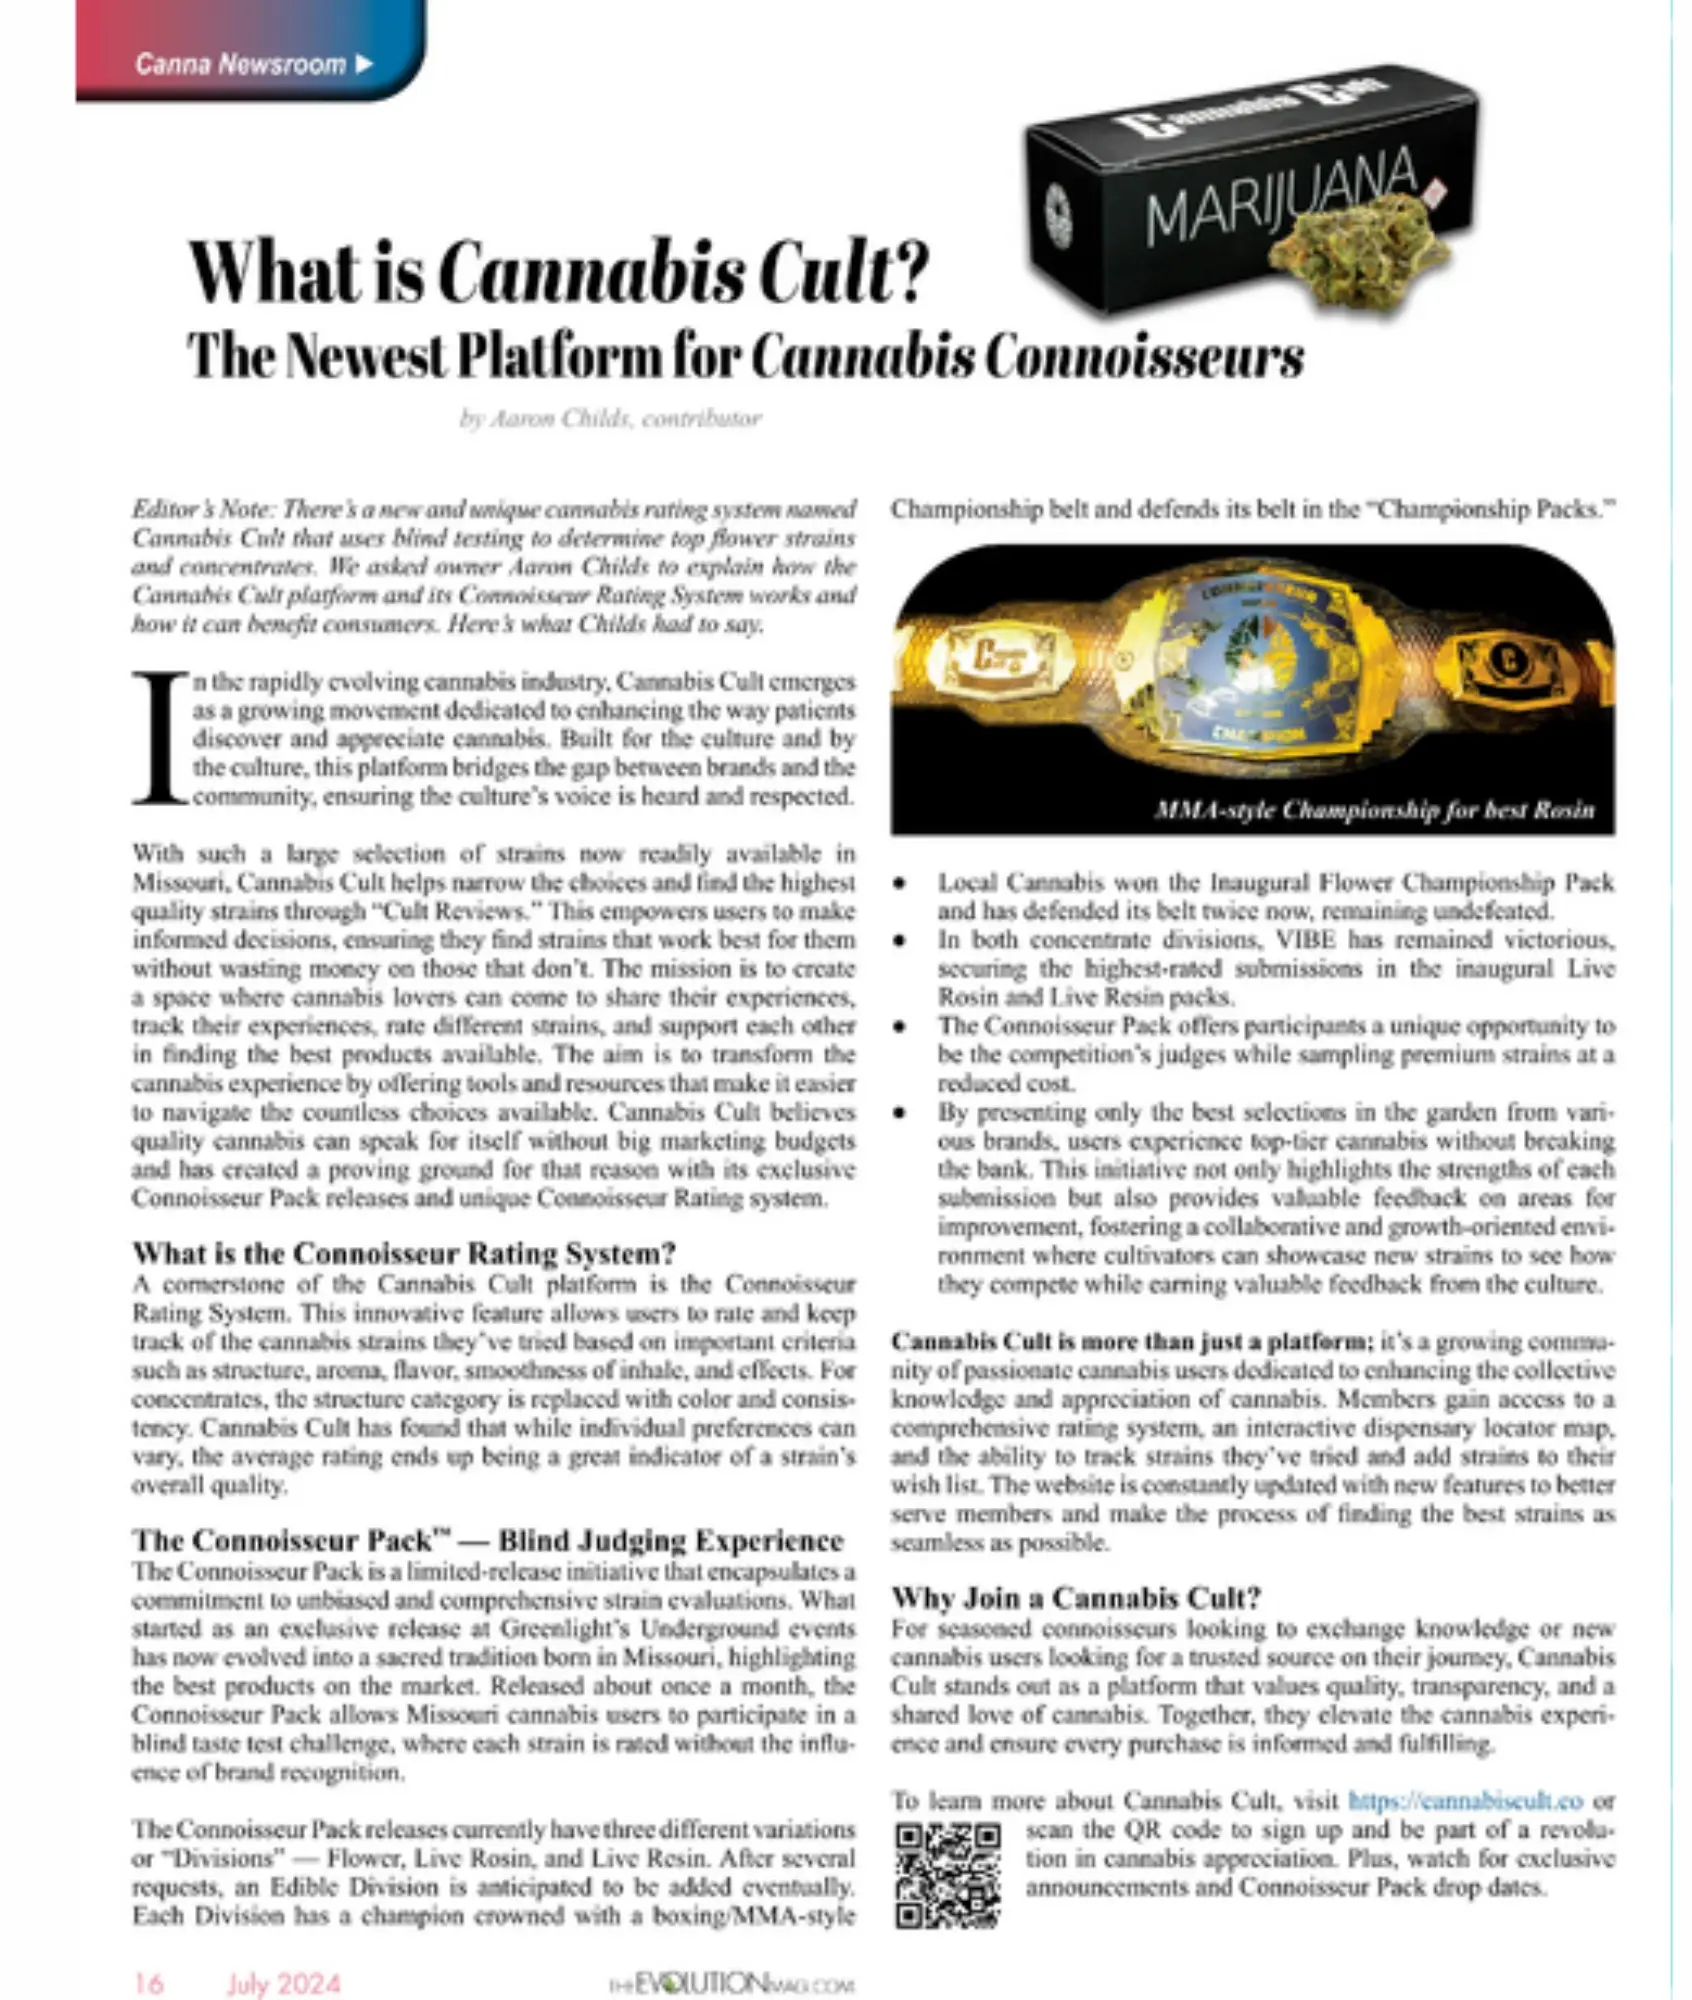 Evolution Magazine features The Cannabis Cult in the July Edition